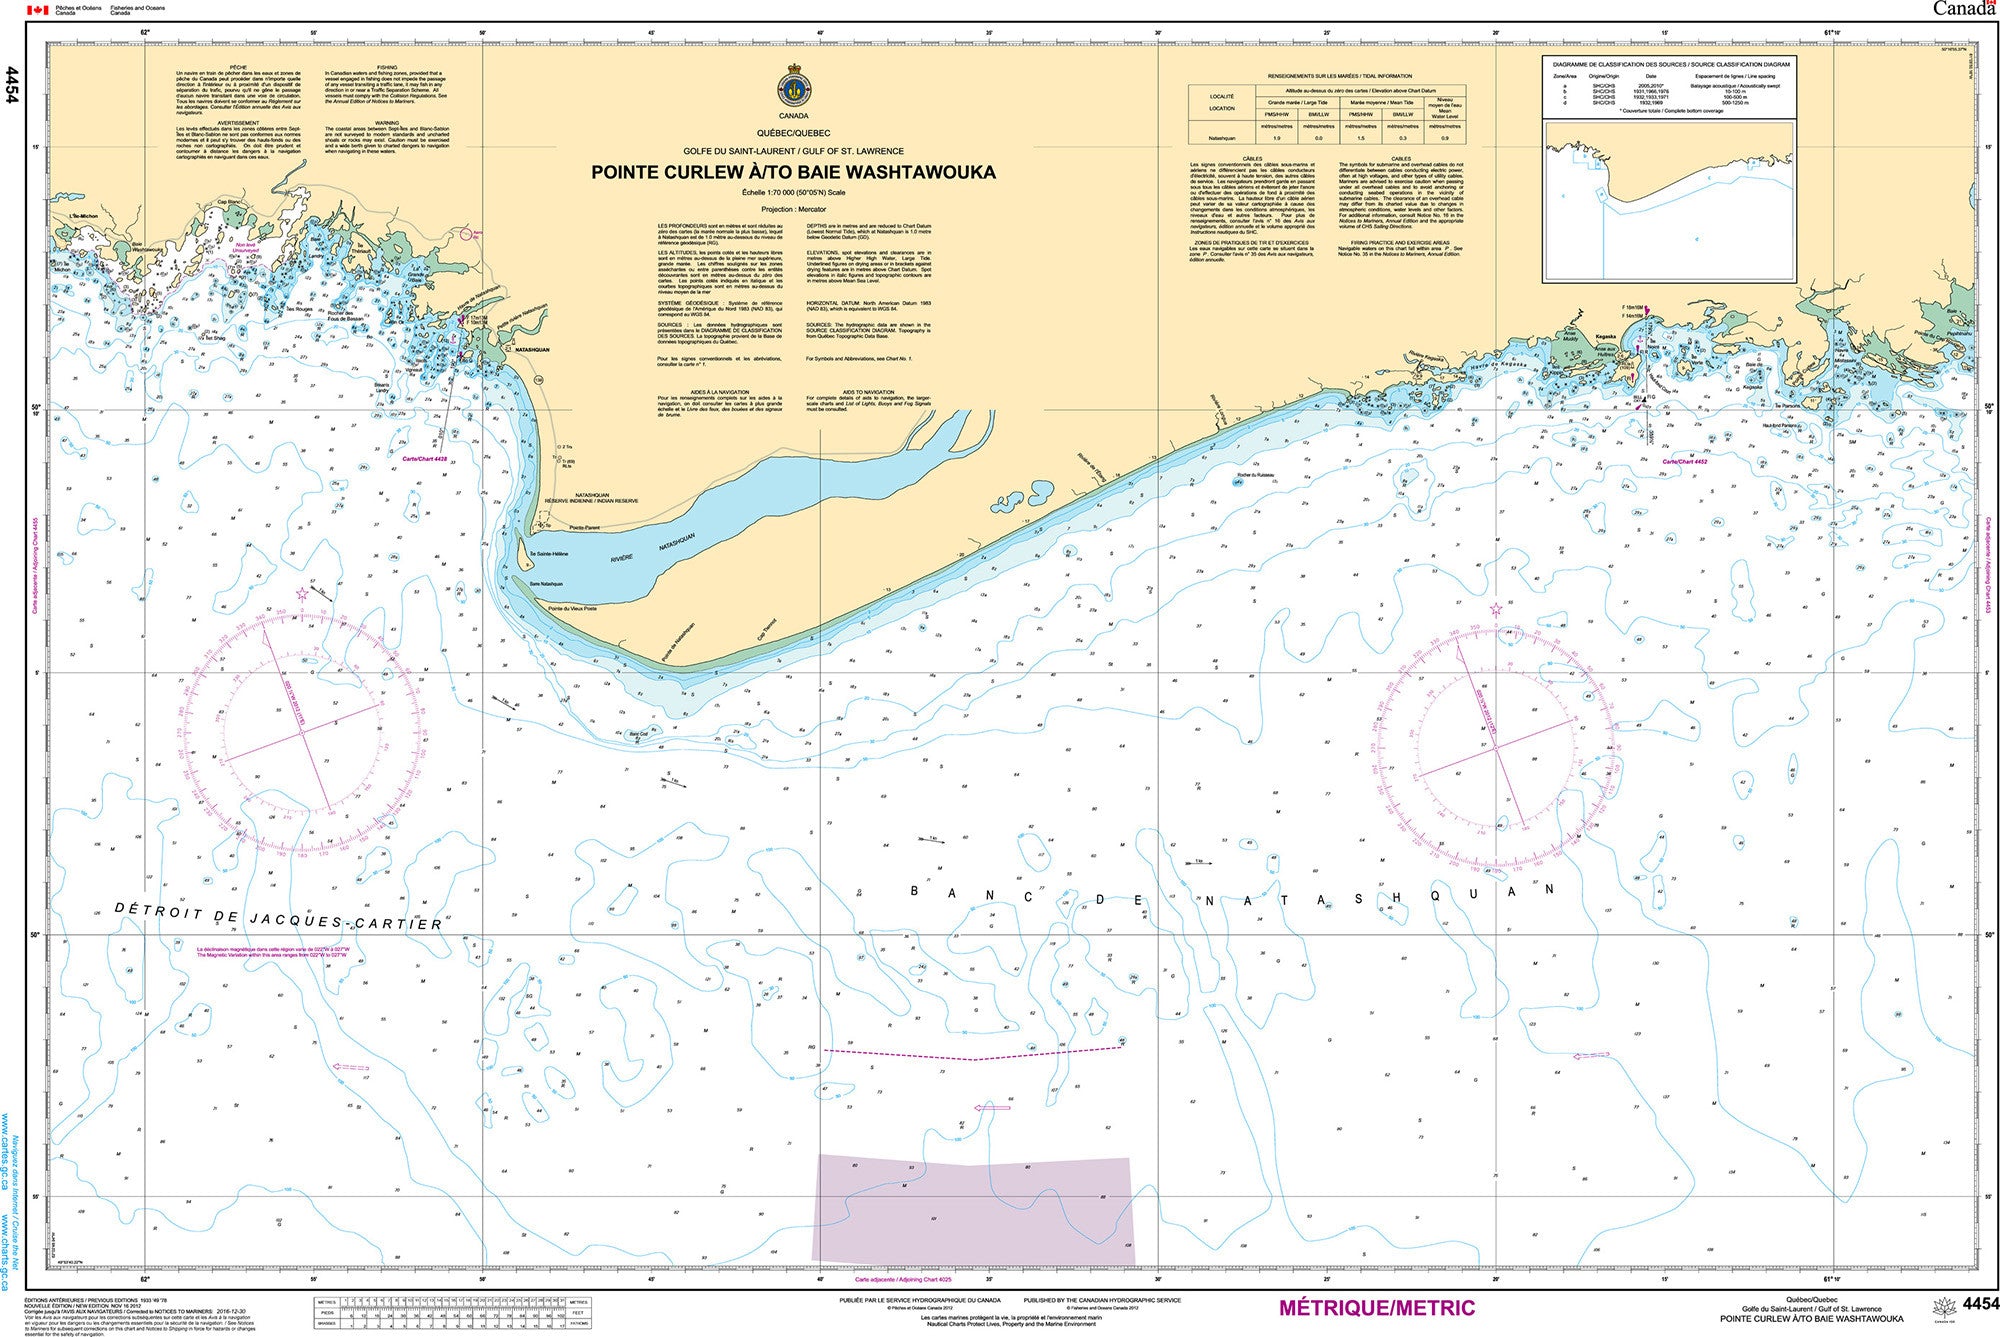 Canadian Hydrographic Service Nautical Chart CHS4454: Pointe Curlew à/to Baie Washtawouka